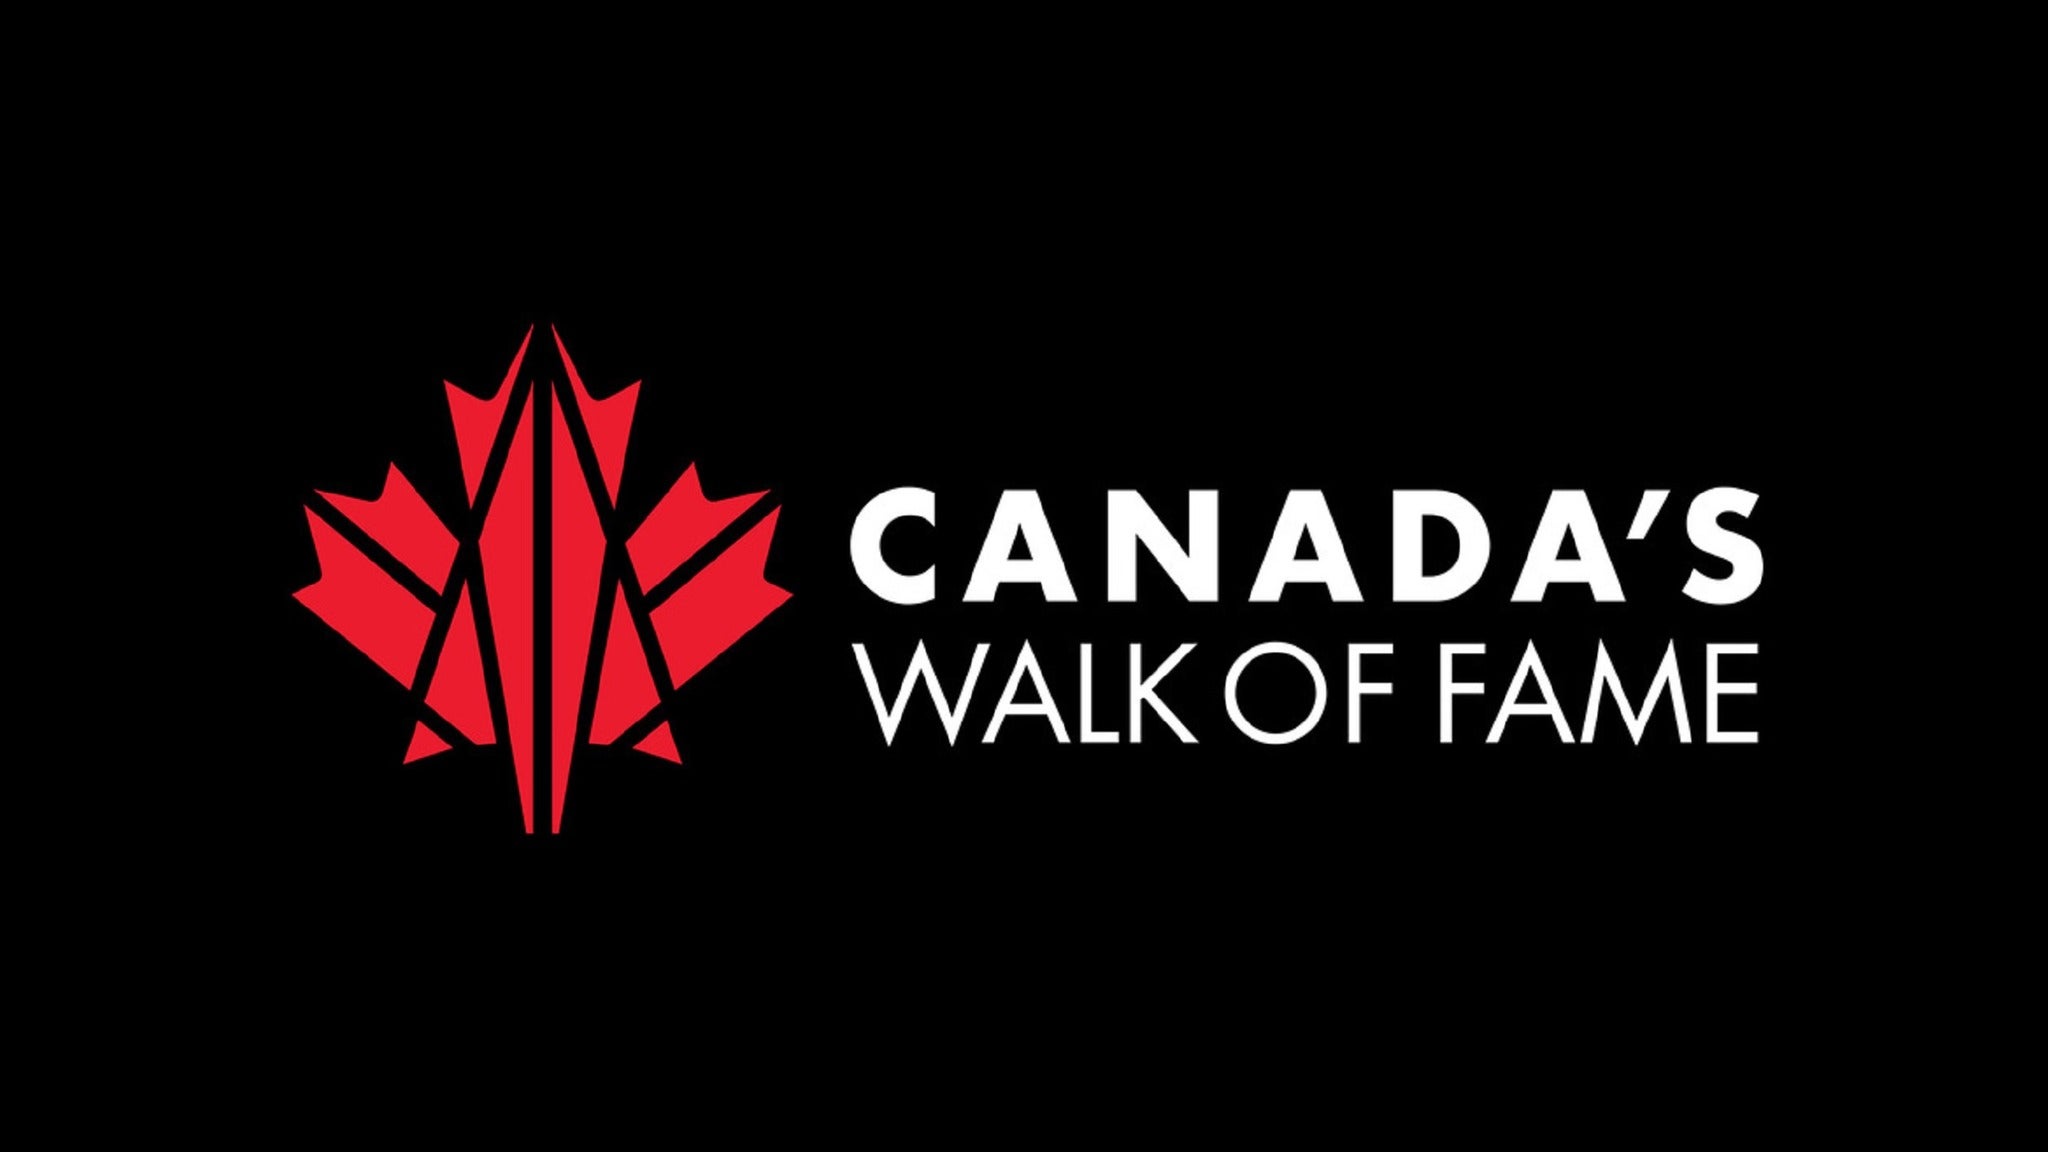 Canada's Rock Of Fame pre-sale password for your tickets in Toronto